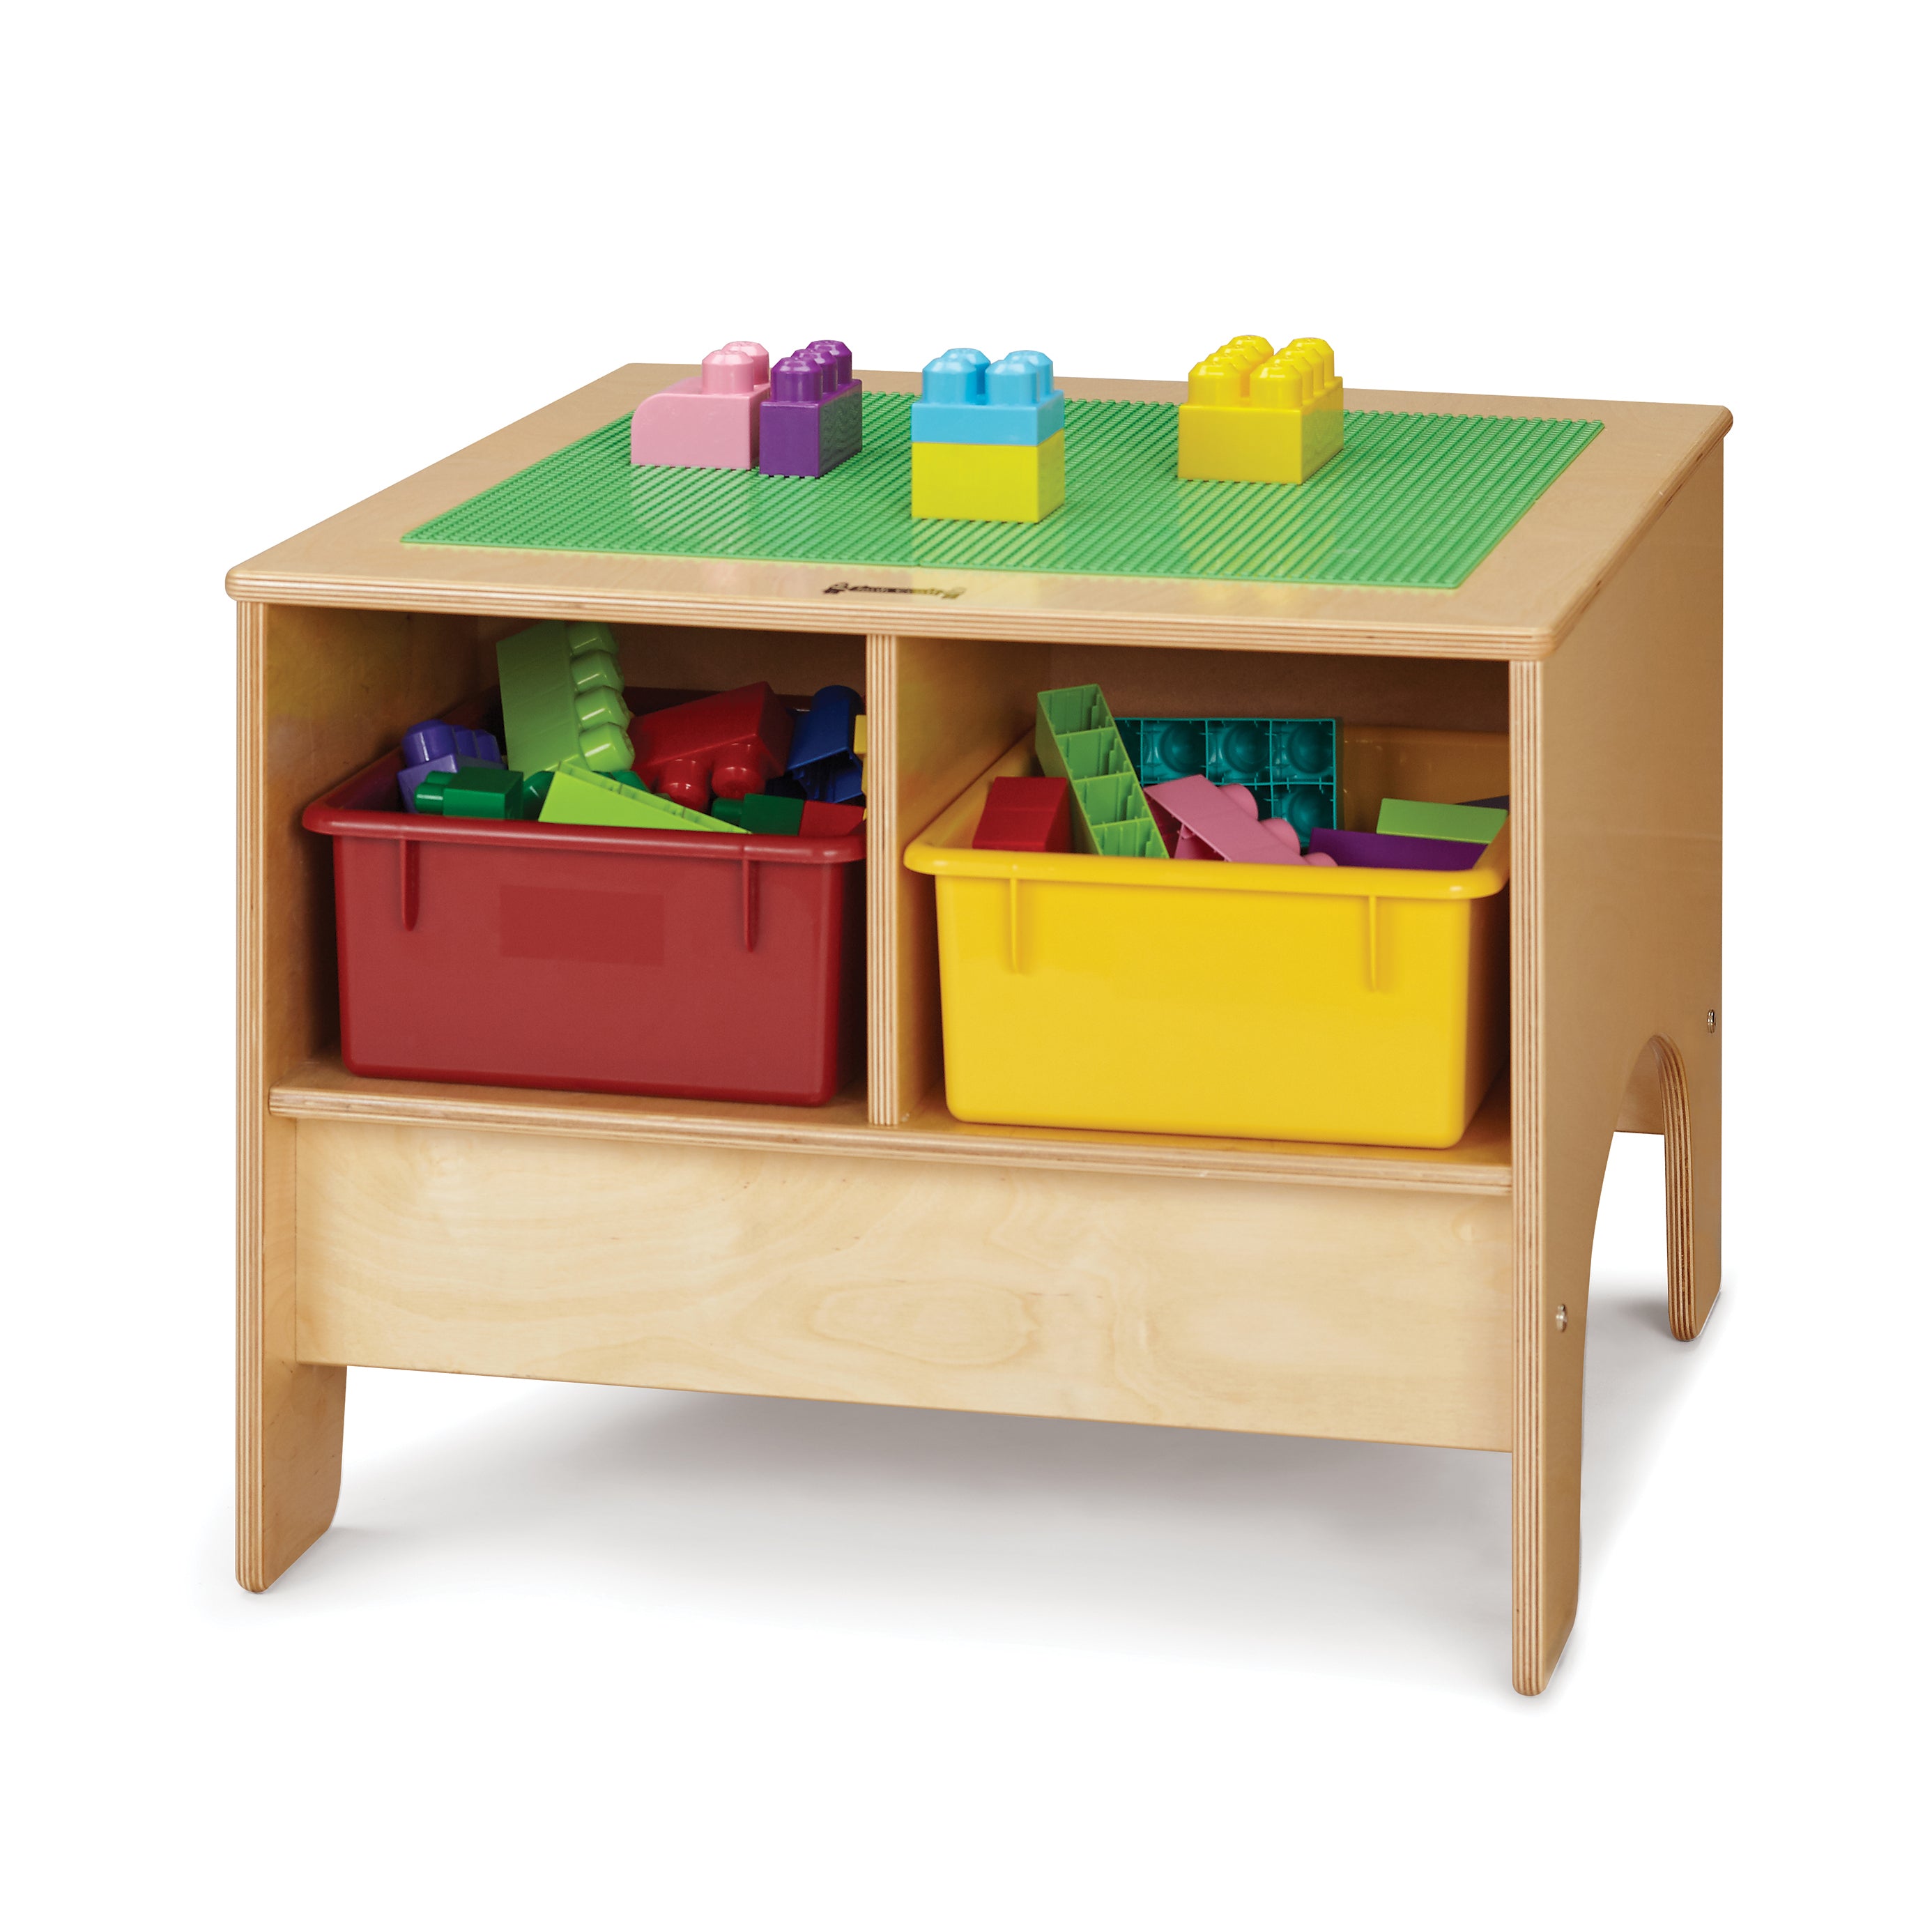 57459JC, Jonti-Craft KYDZ Building Table - Preschool Brick Compatible - with Colored Tubs